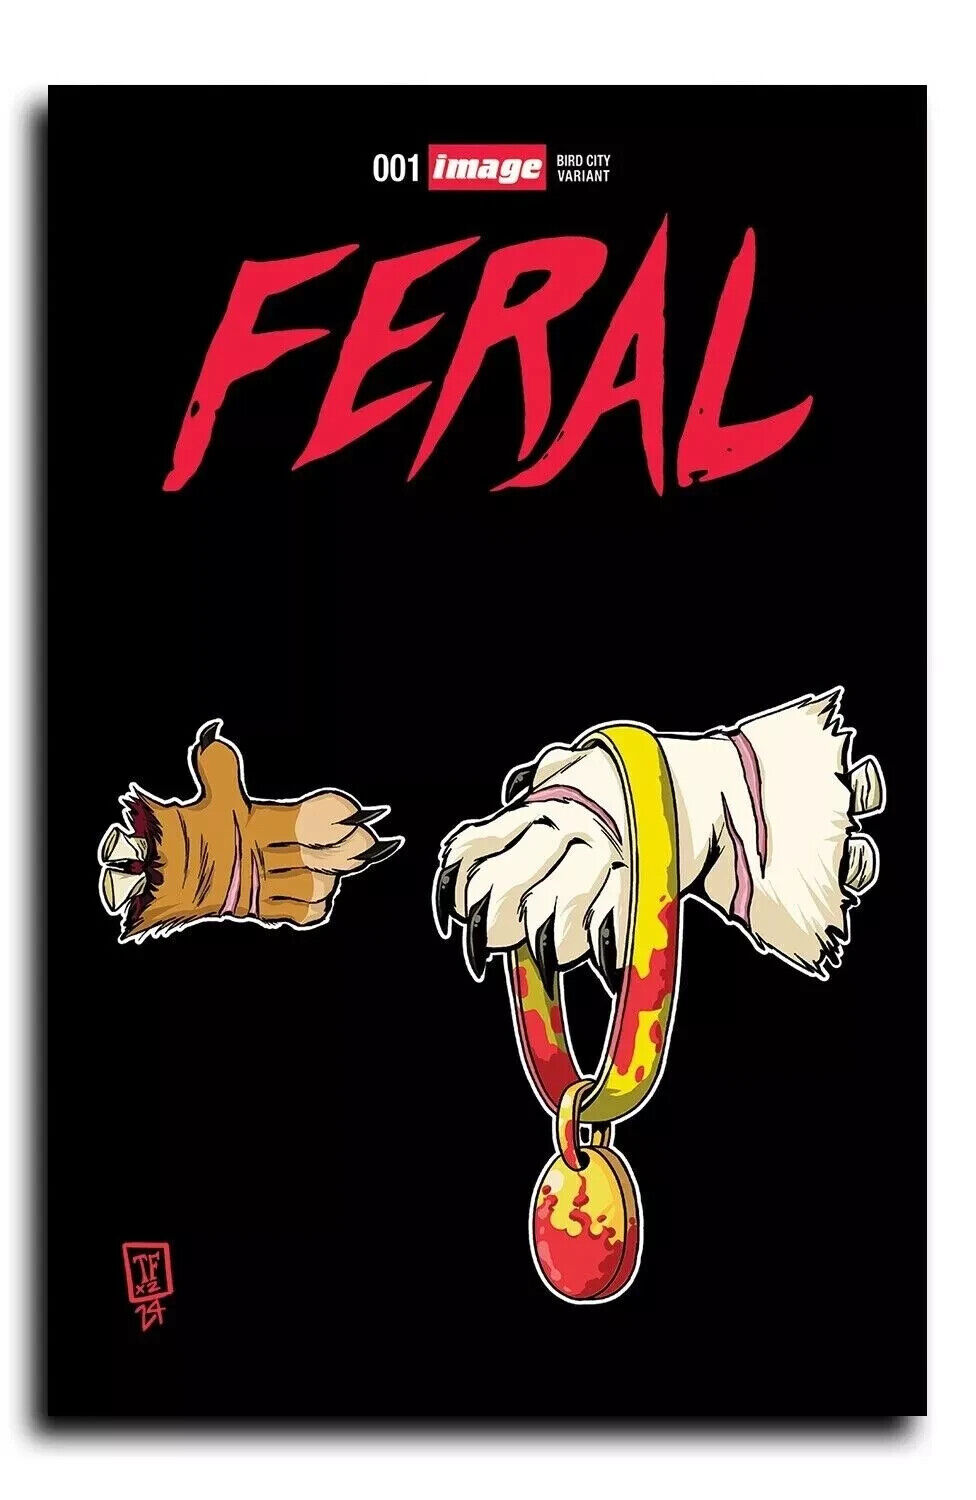 Feral #1 - Trish Forstner - Run the Jewels - Limited to 500